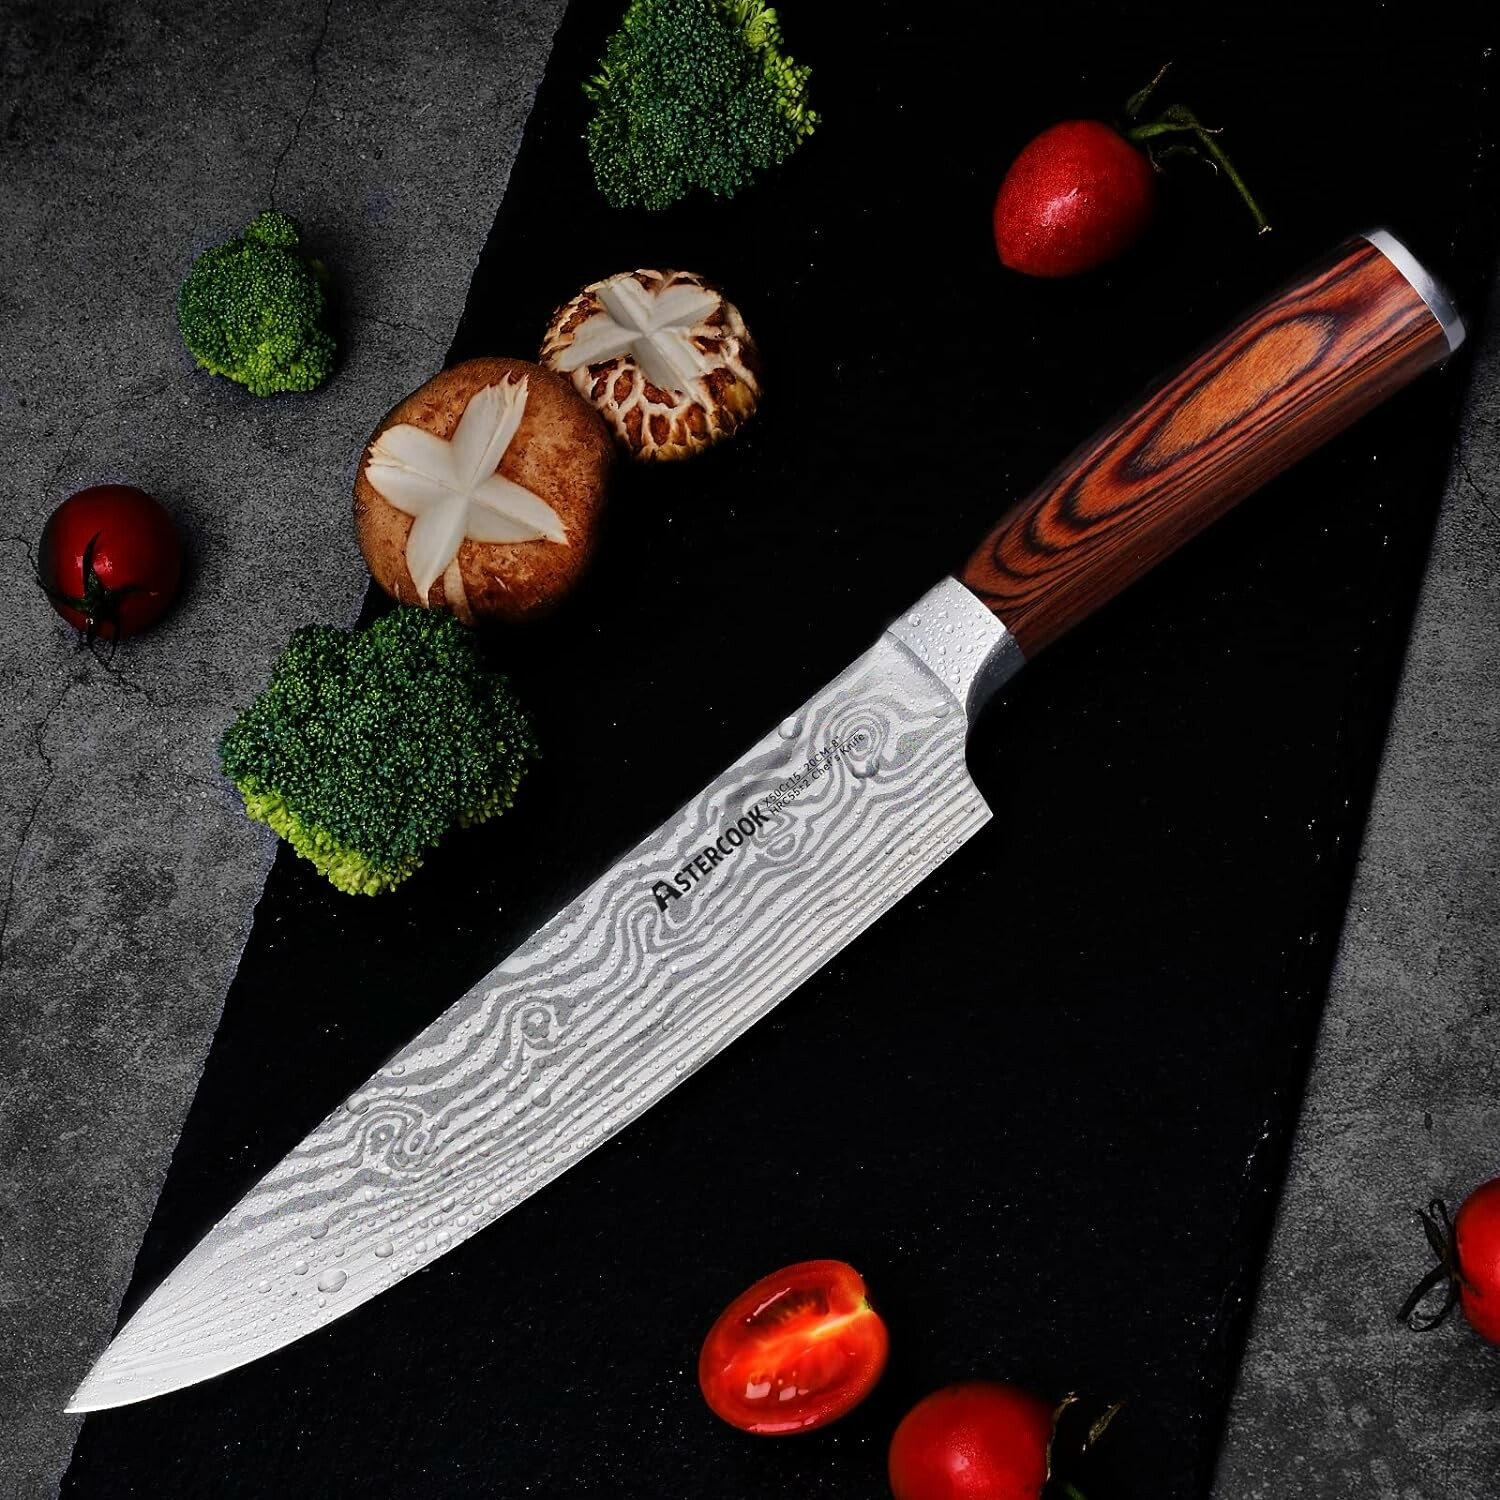  Astercook Chef Knife, 8 Inch Pro Kitchen Knife